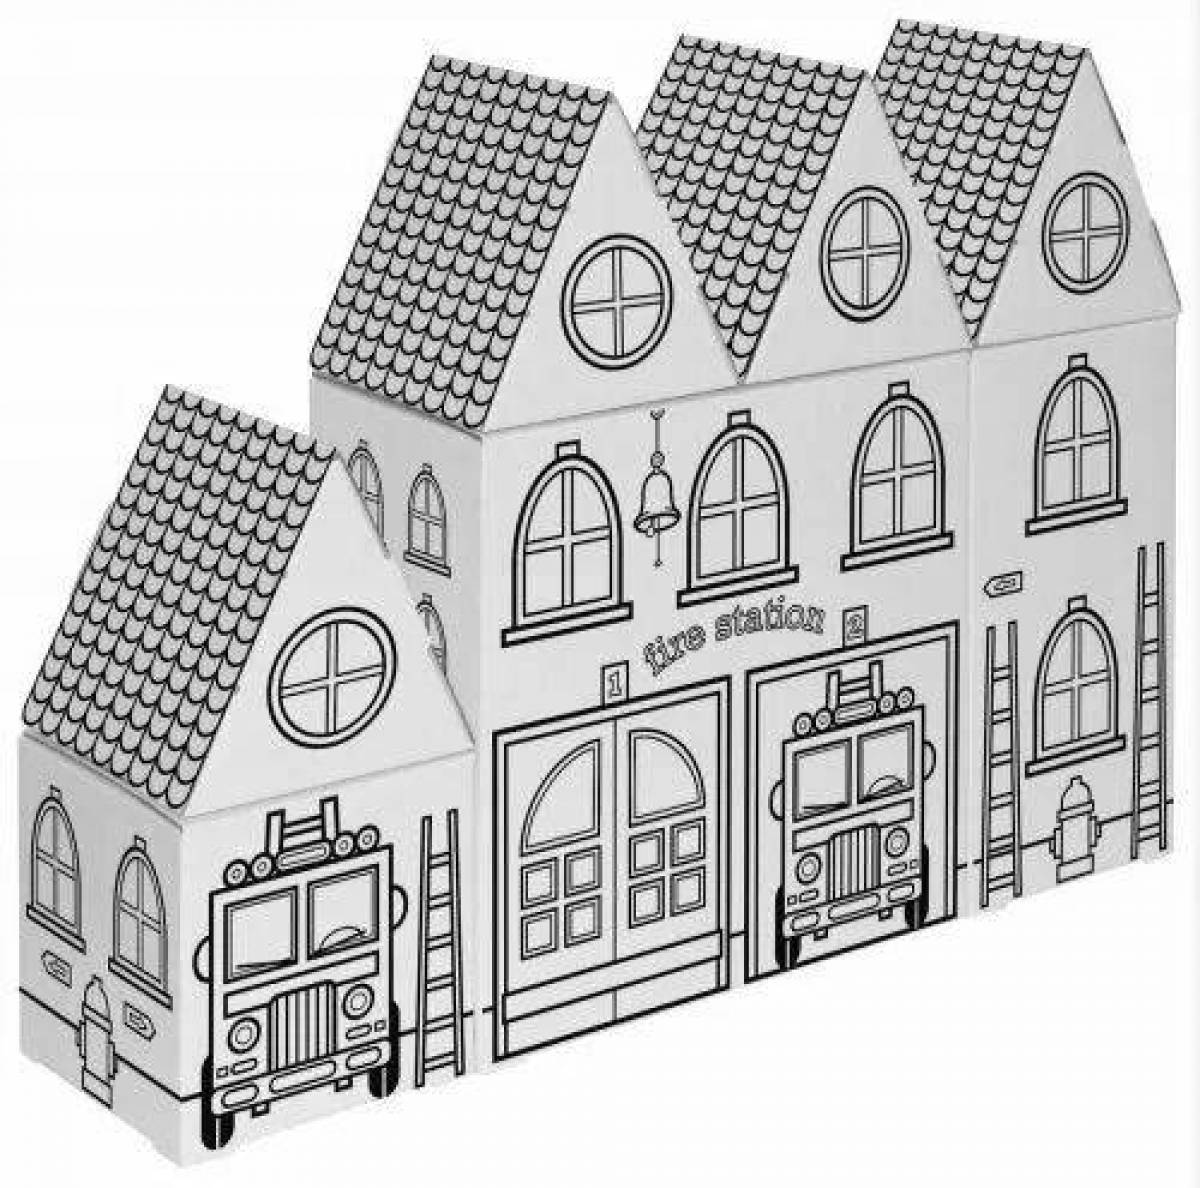 Coloring book charming wooden constructor